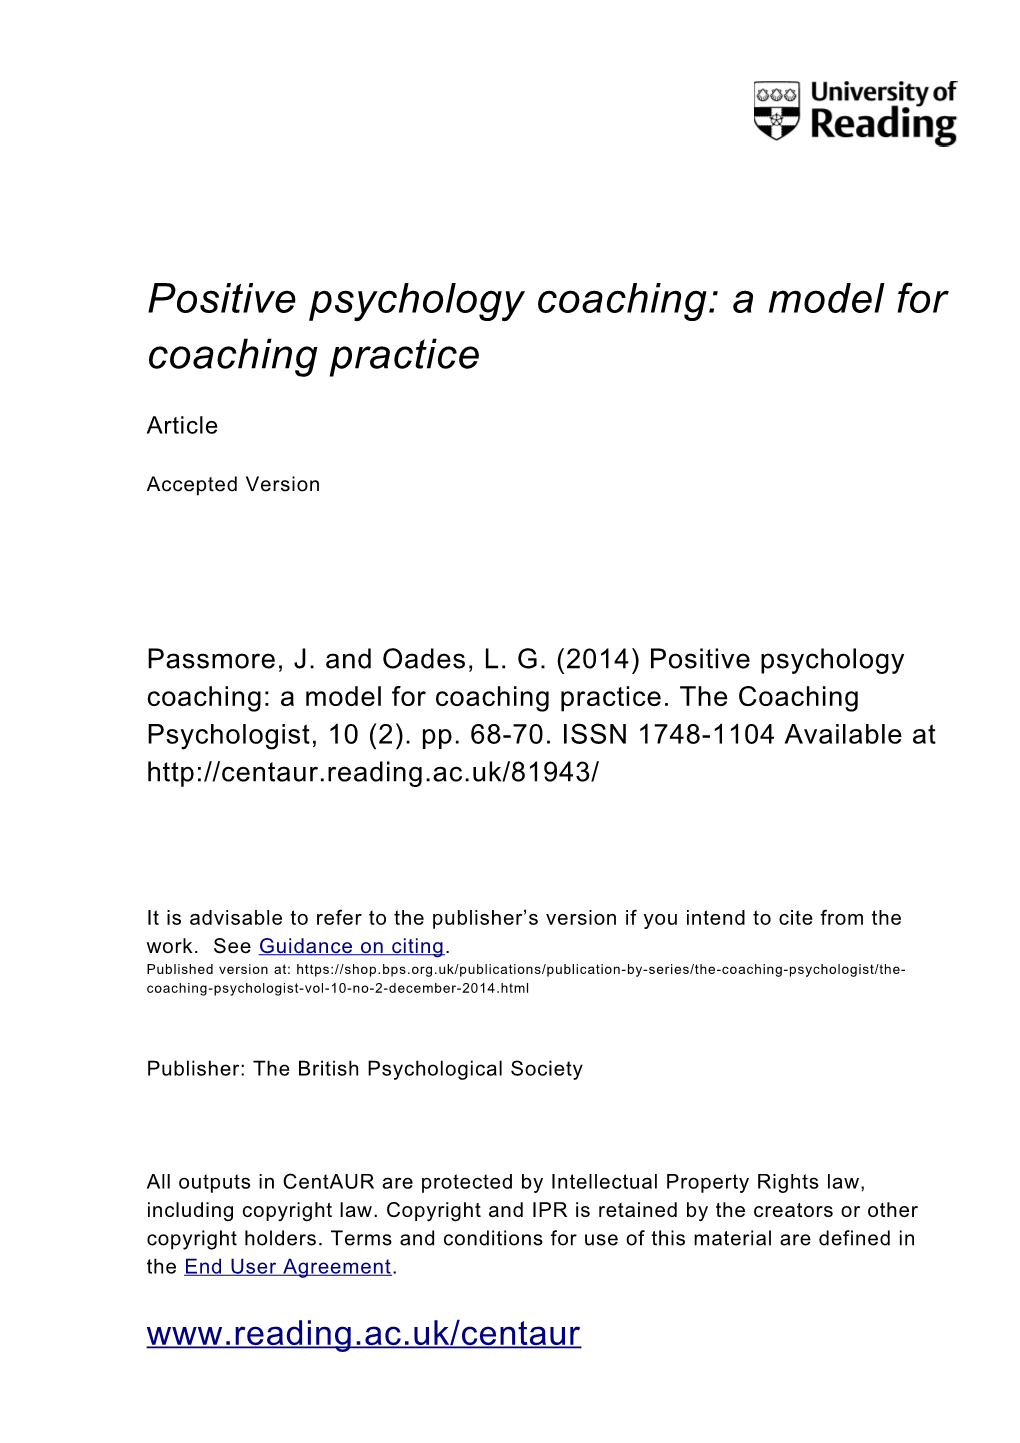 Positive Psychology Coaching: a Model for Coaching Practice